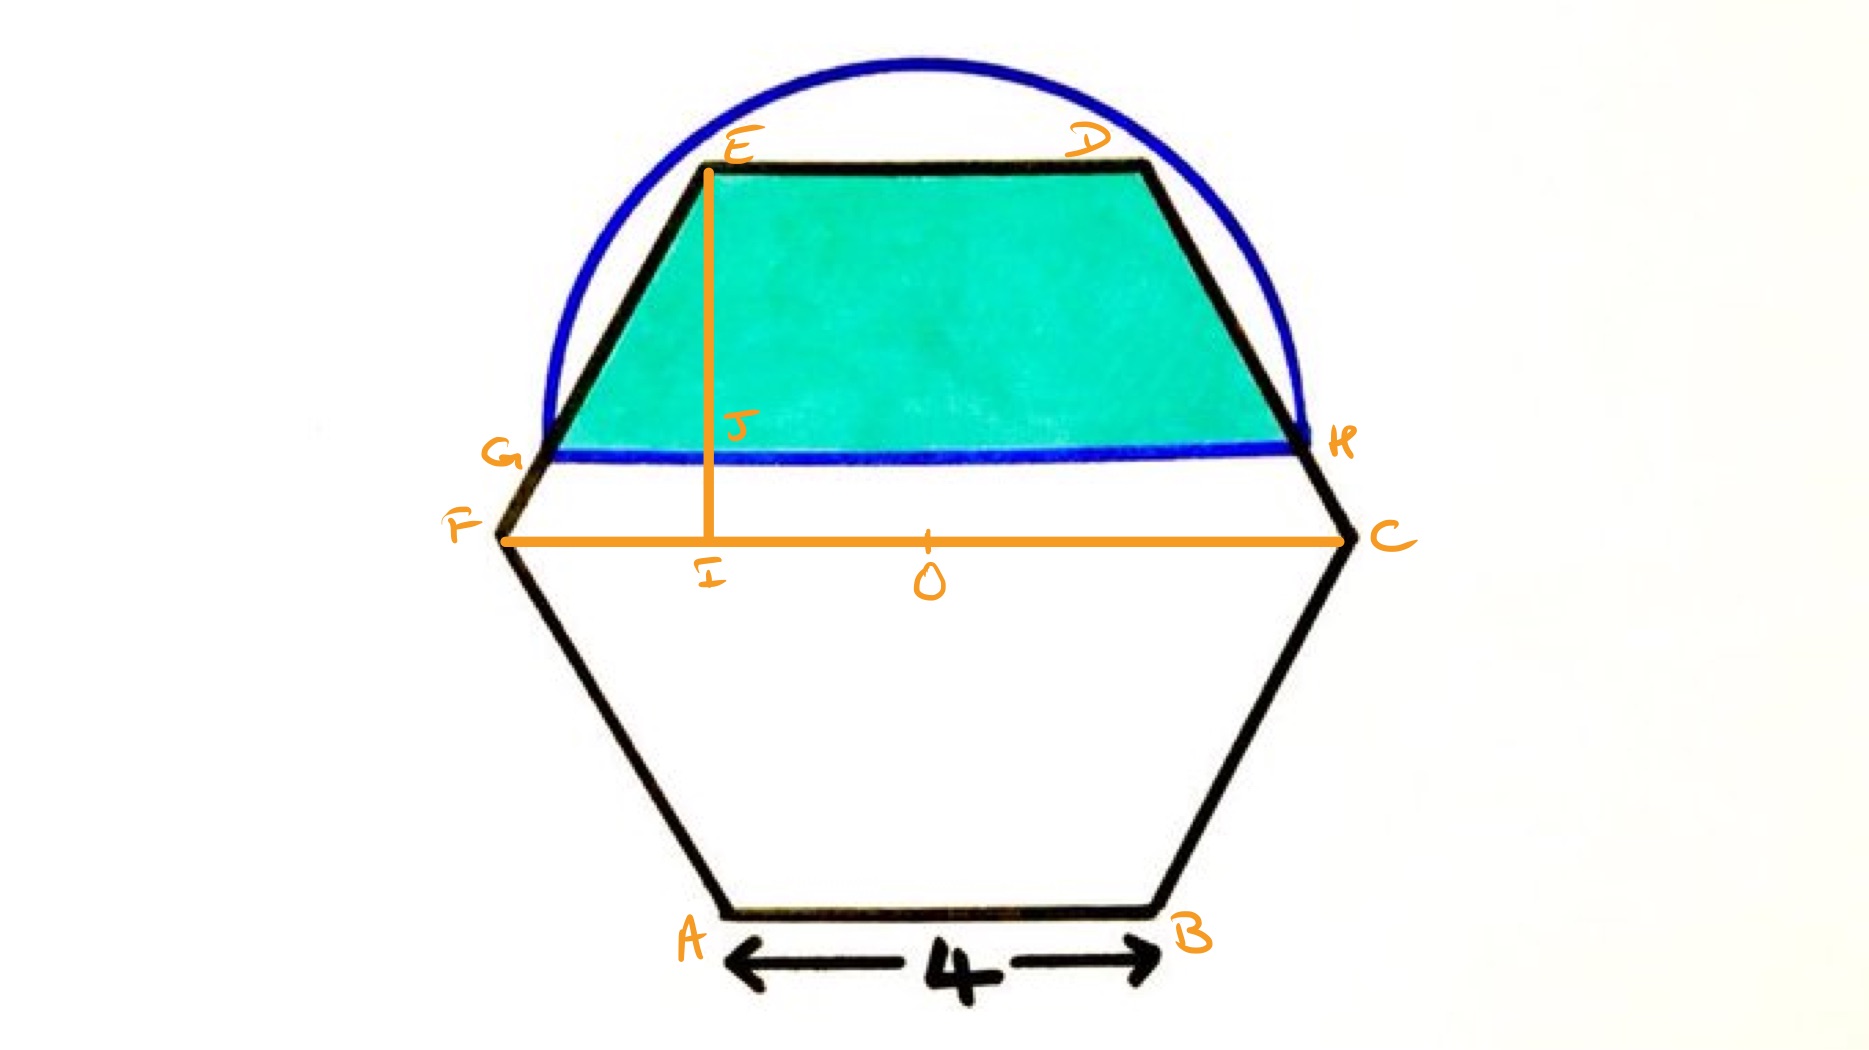 Semi-circle on a hexagon labelled